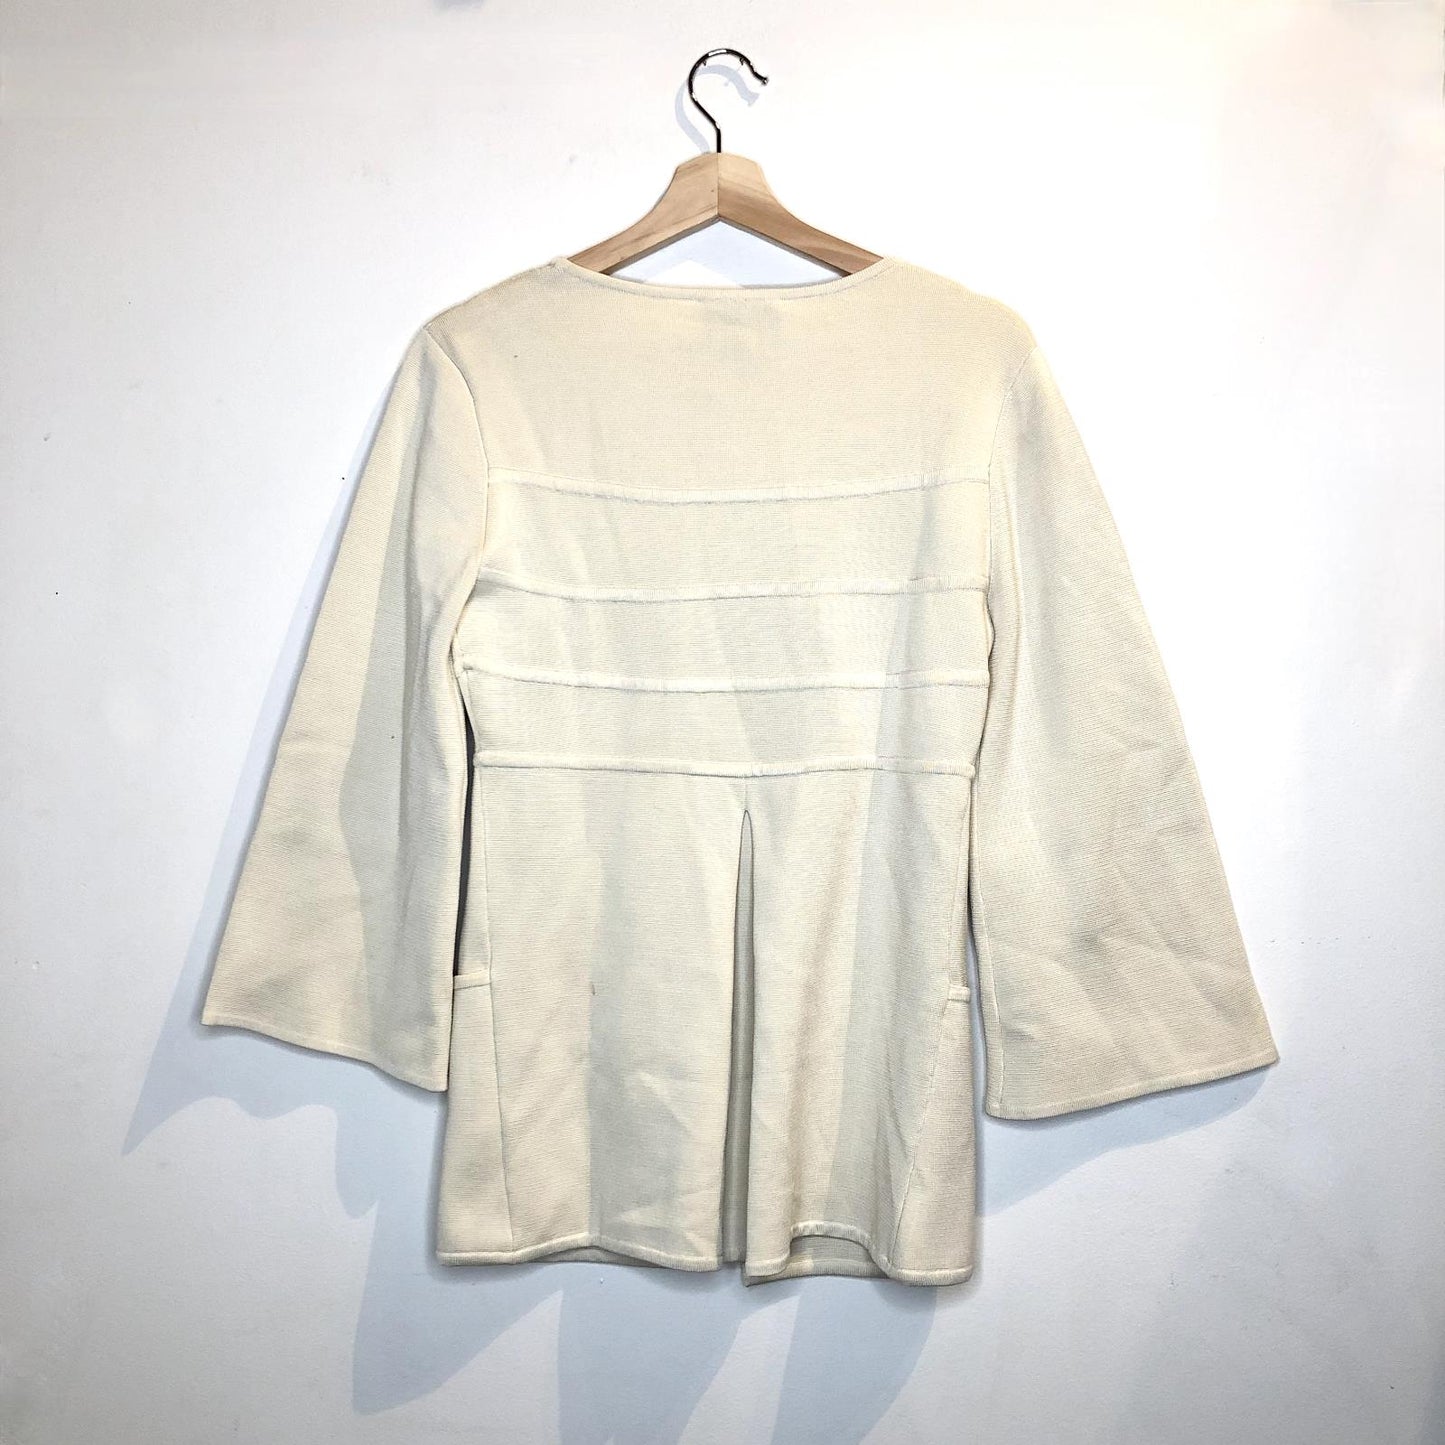 M - Temperley London Off White Button Front Knit Sweater Jacket Sweater 1130TS